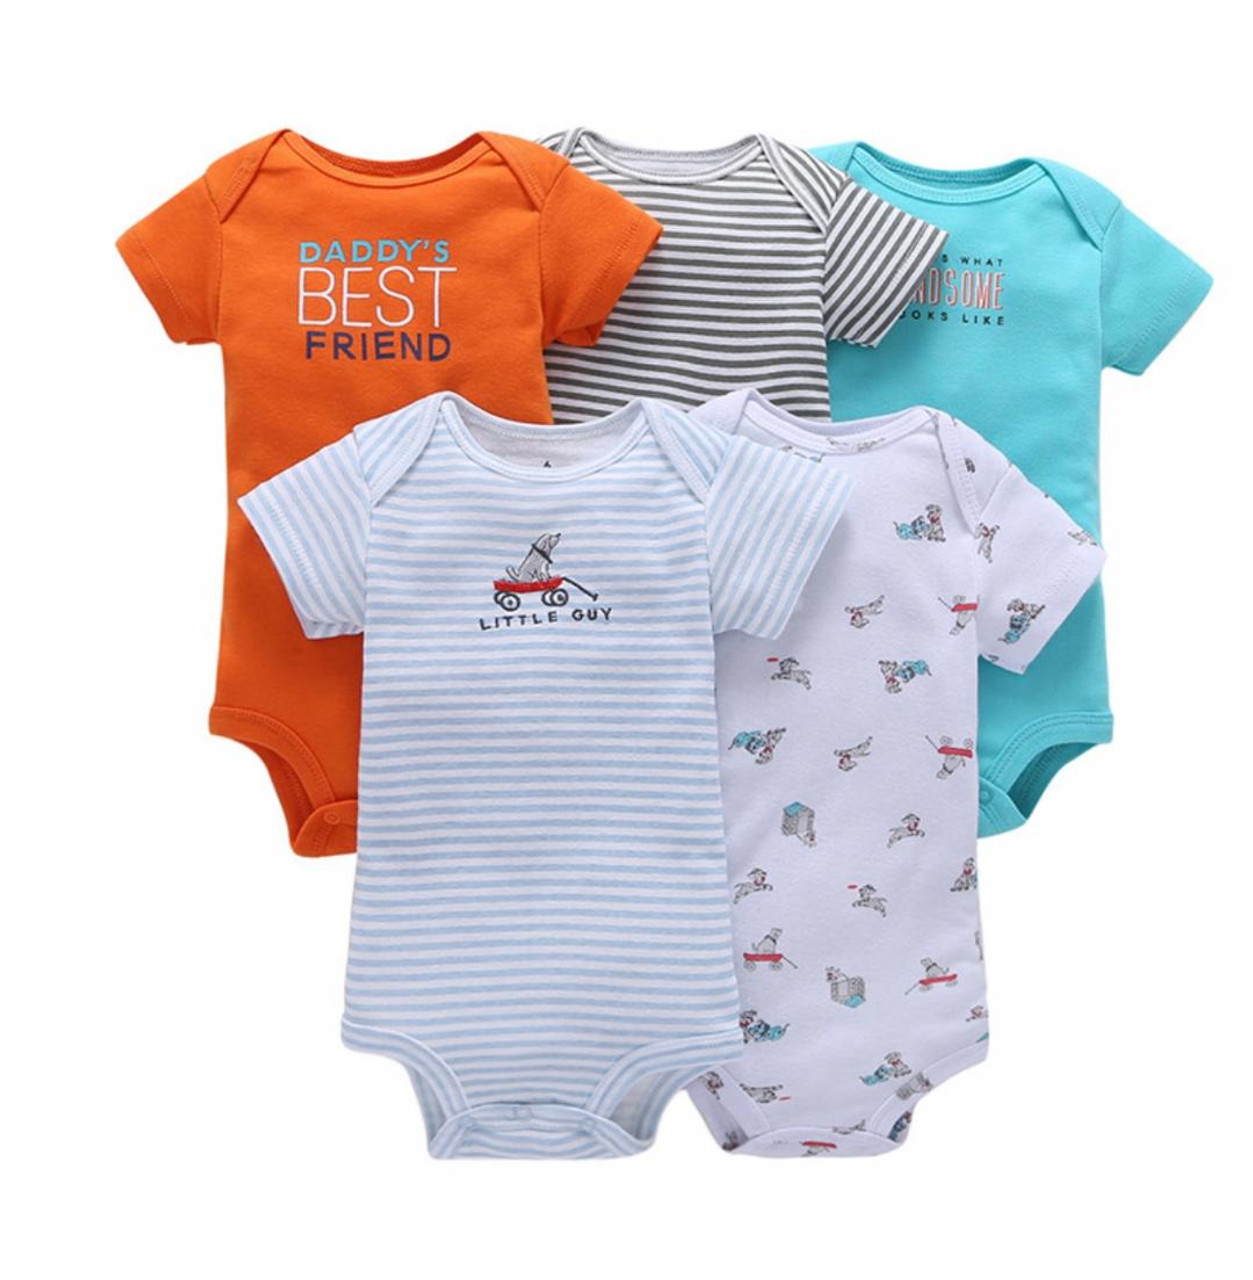 https://cdn11.bigcommerce.com/s-wnyvgqtxr3/images/stencil/1280x1280/products/107/377/BABY2__90363.1584991653.jpg?c=2